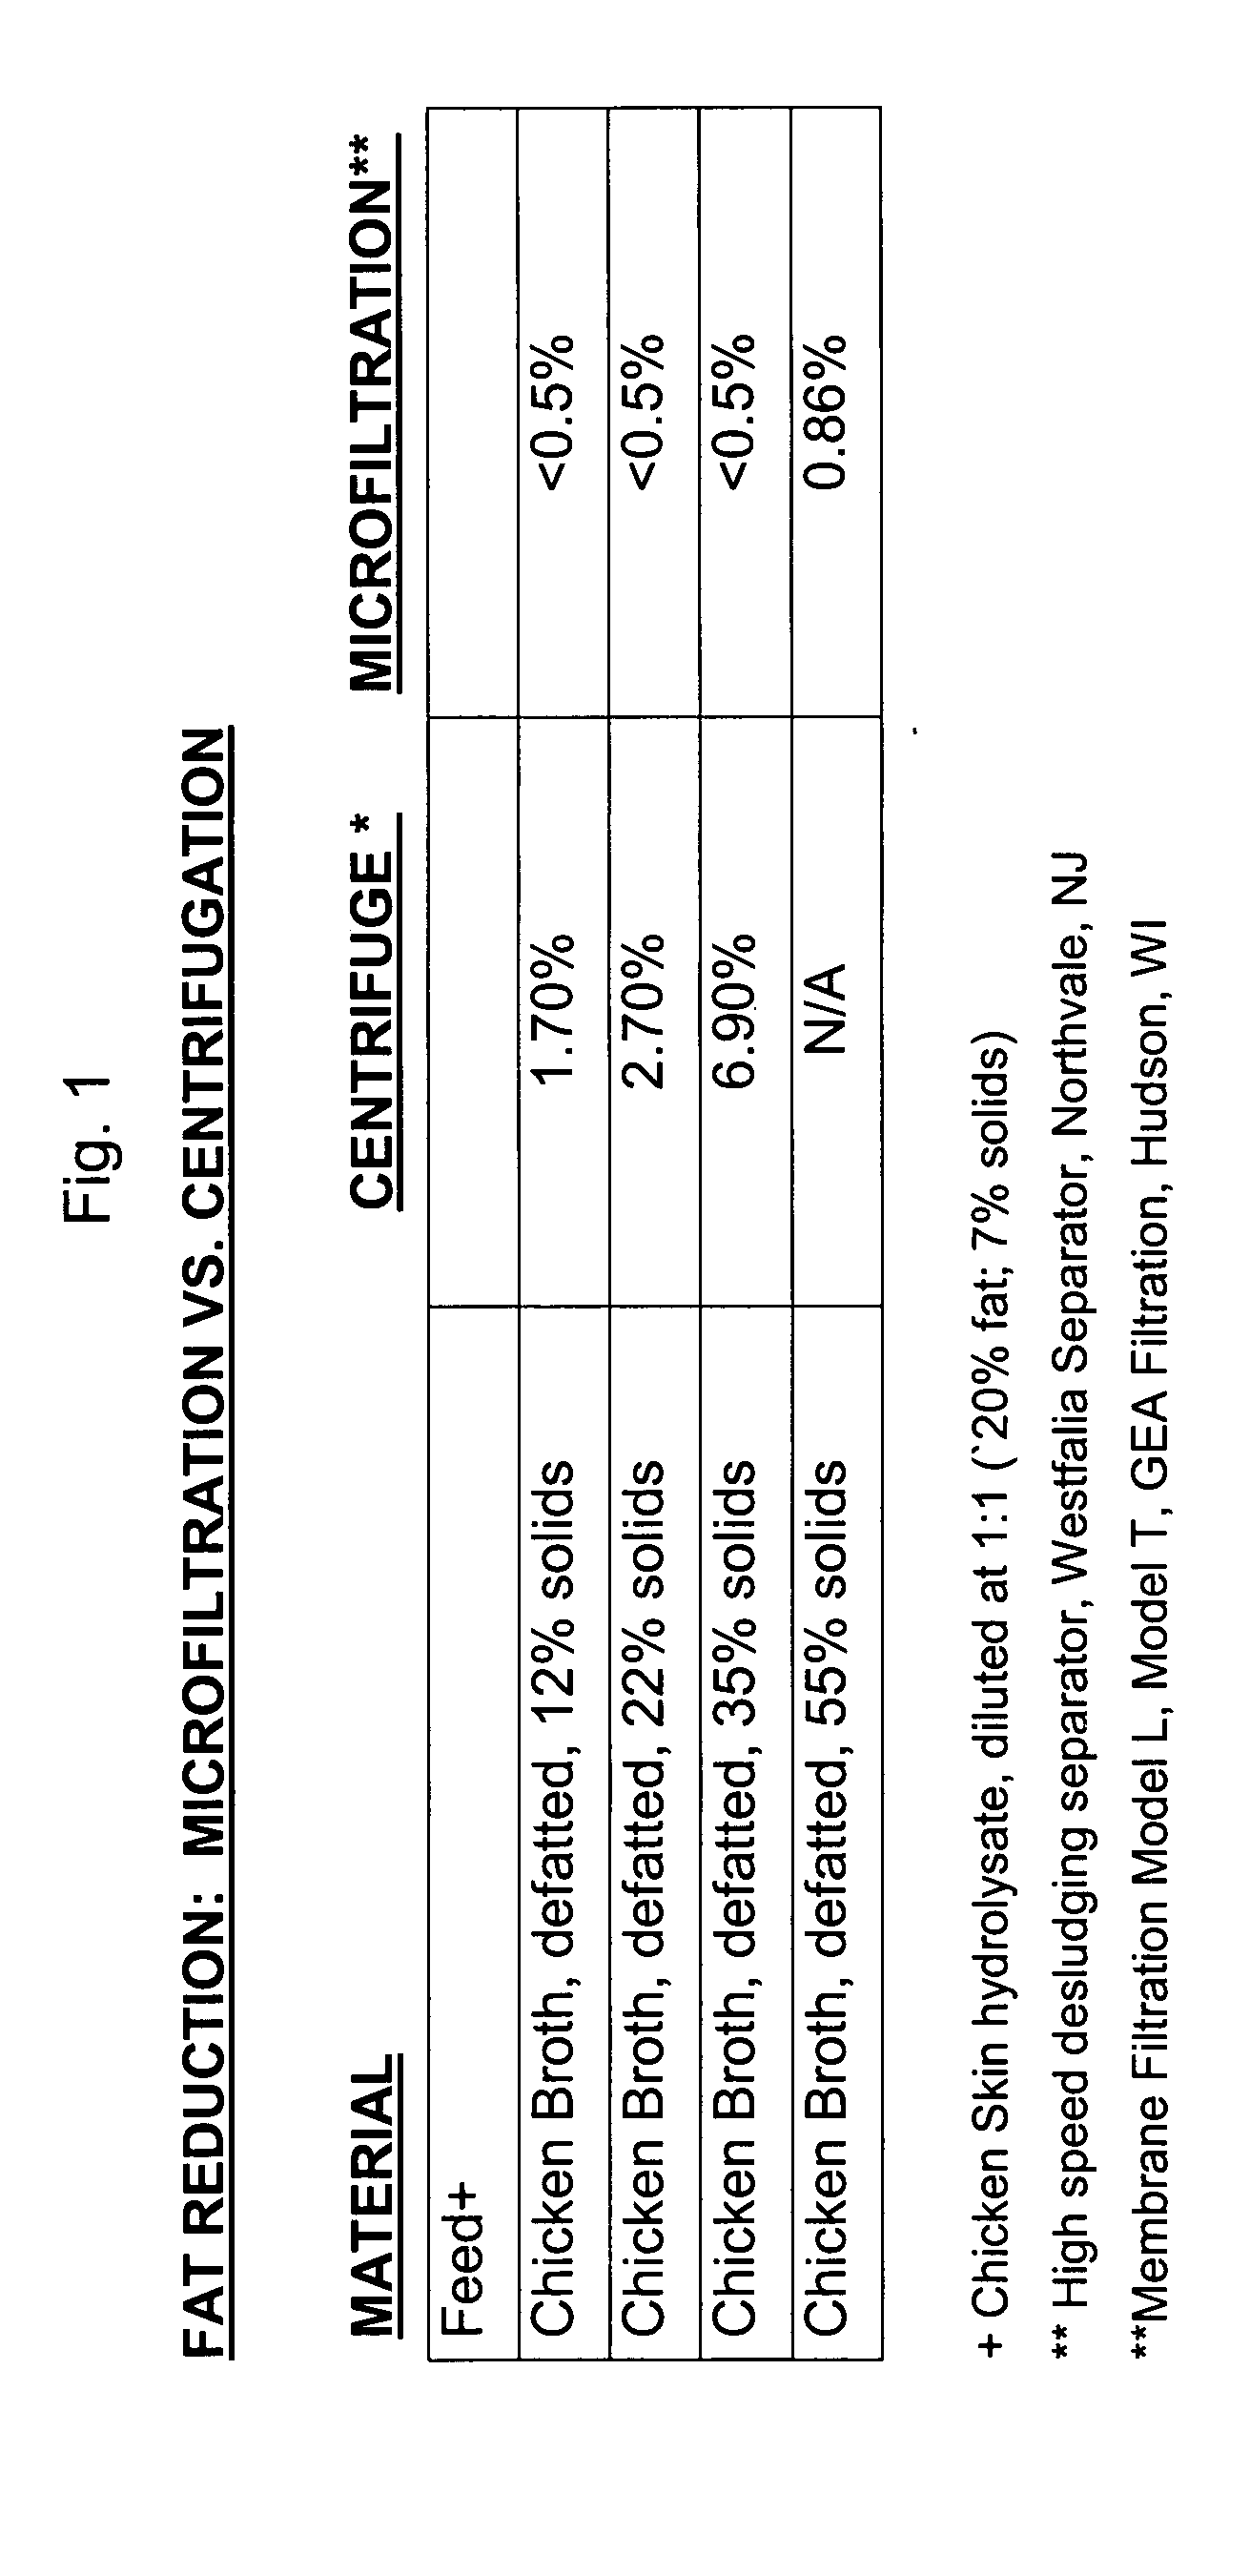 Process for producing a low fat, concentrated meat broth from meat by-products